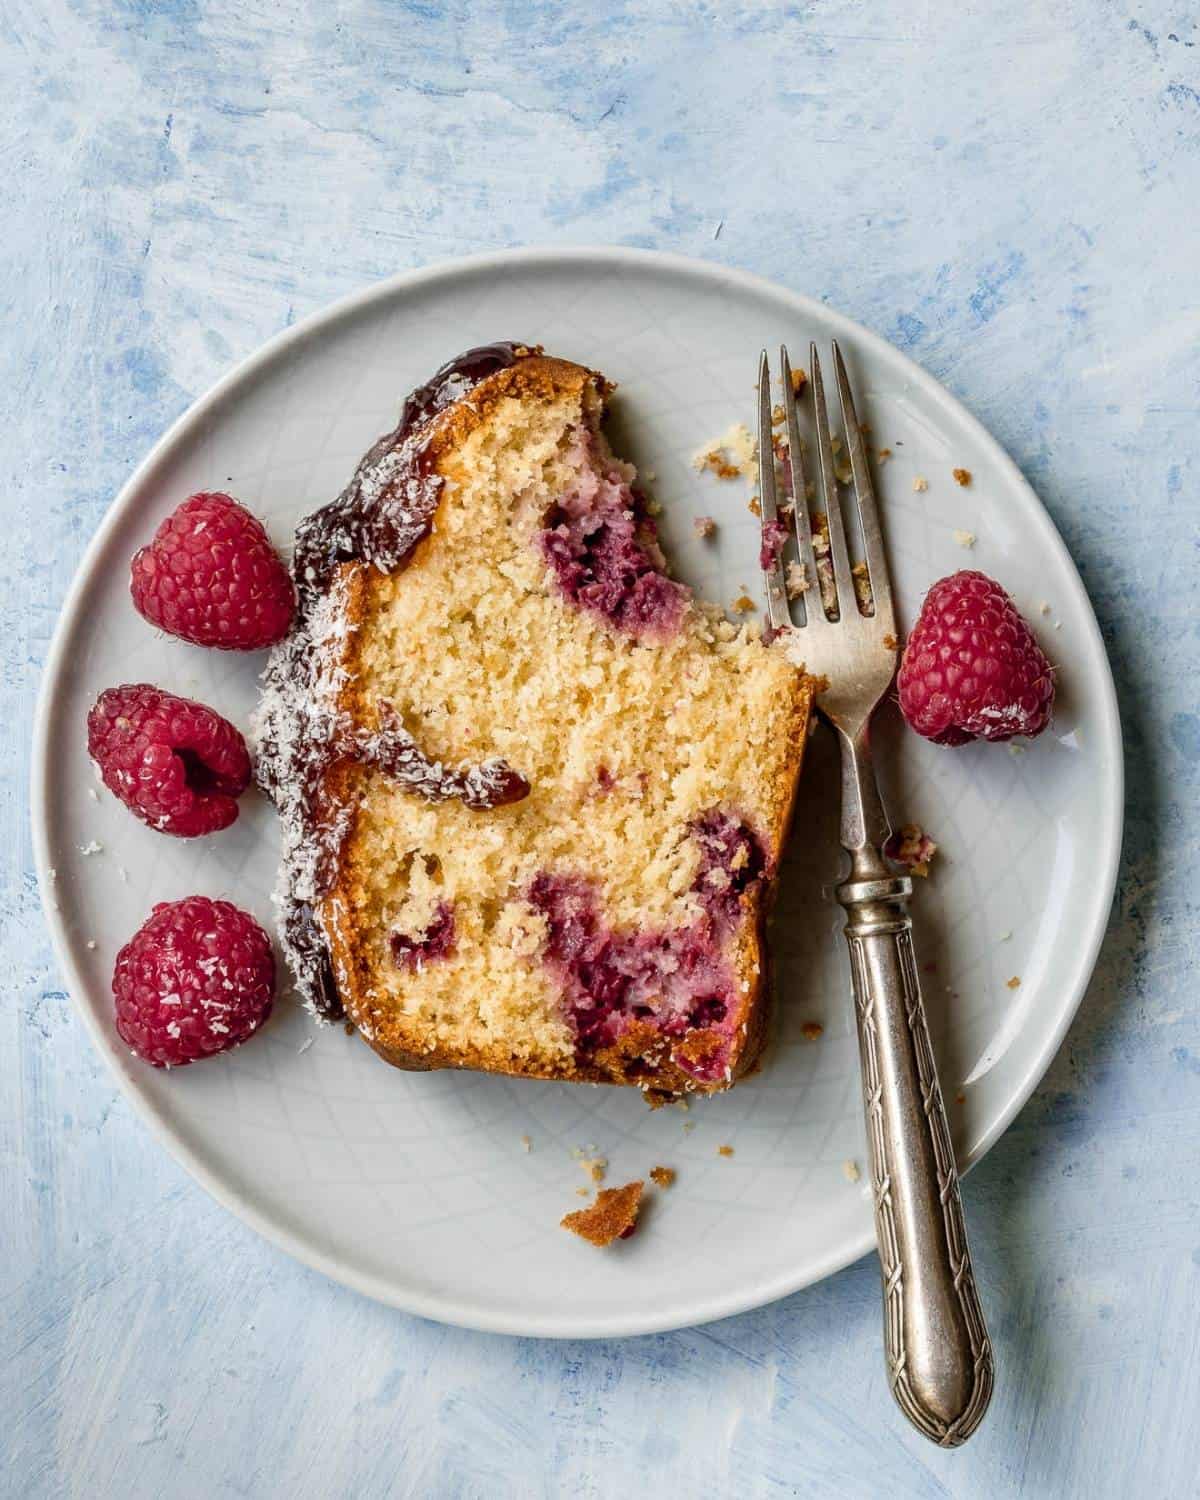 Slice-of-Coconut-and-Raspberry-Loaf-on-a-plate-with-a-fork-and-4-raspberries-aside